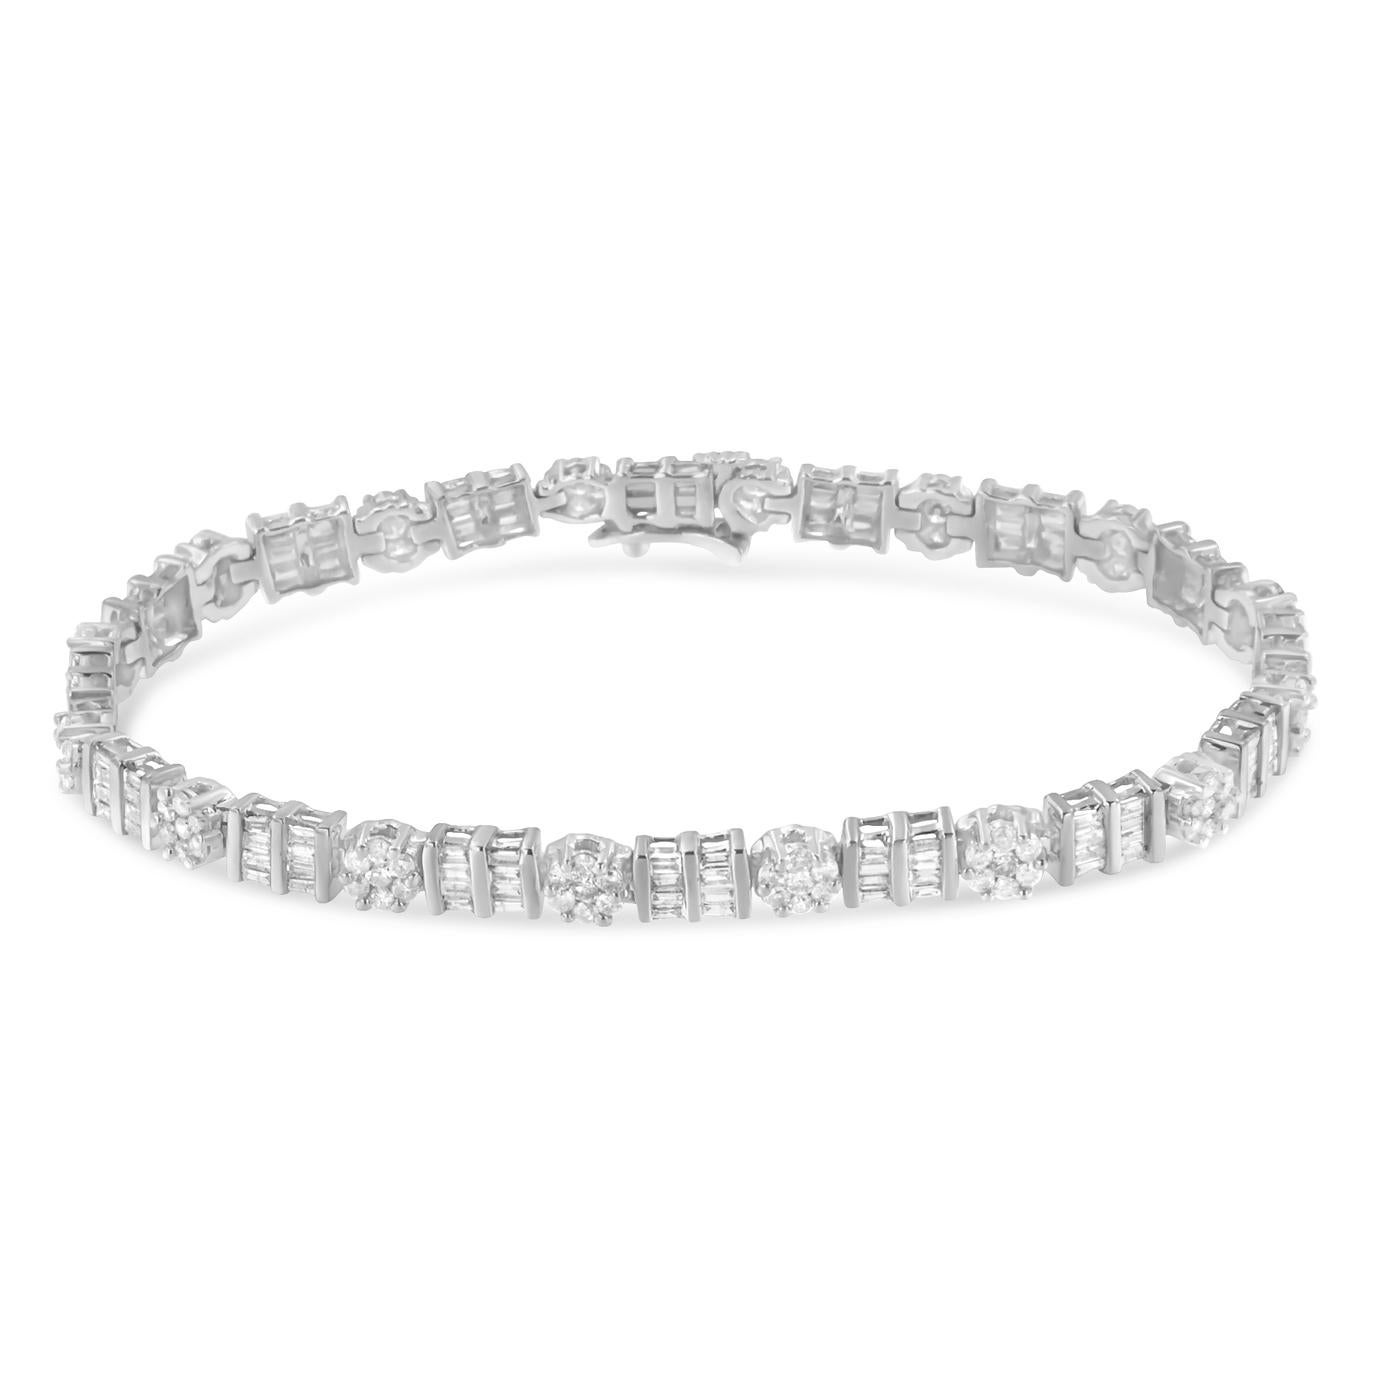 Elegant and timeless, this gorgeous 14K gold alternating station tennis bracelet features 3.43 carat total weight of round and baguette cut diamonds with a whopping 240 stones in all. The tennis bracelet features alternating round and square links